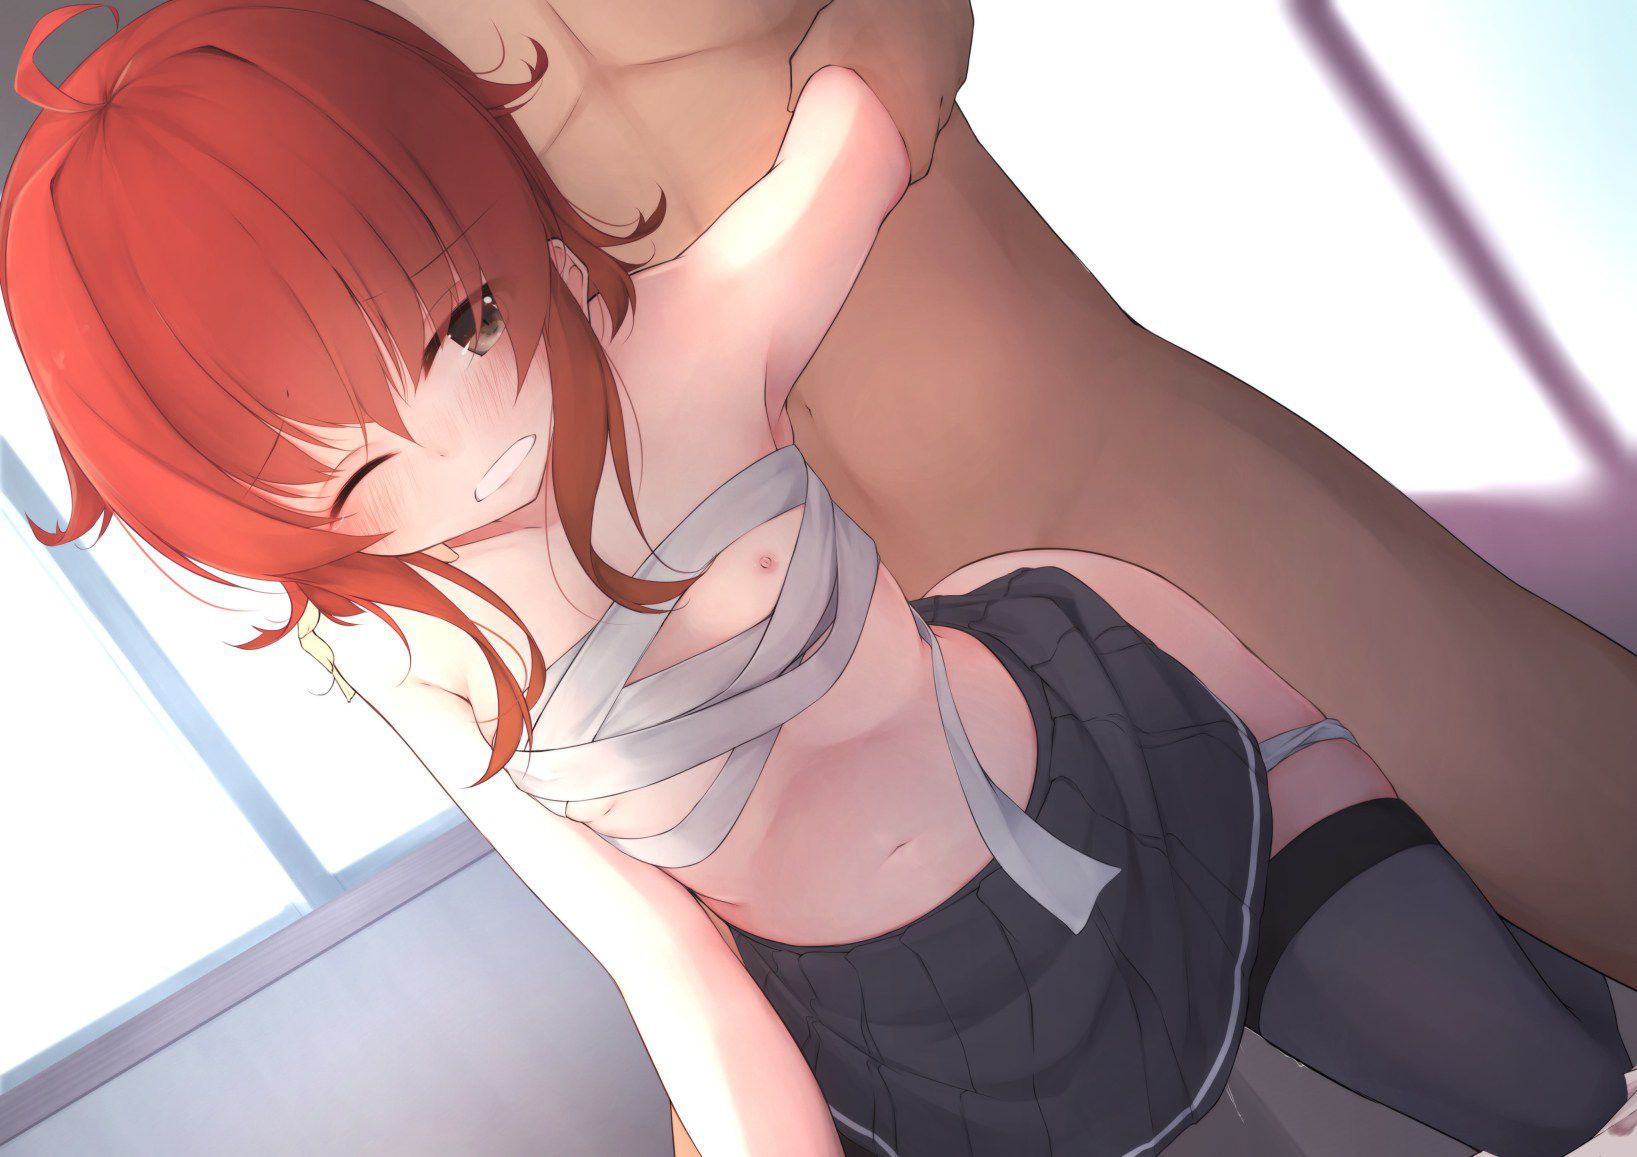 Even though Lori girl is just having doggy sex, it is a simple 2D erotic image feature 30